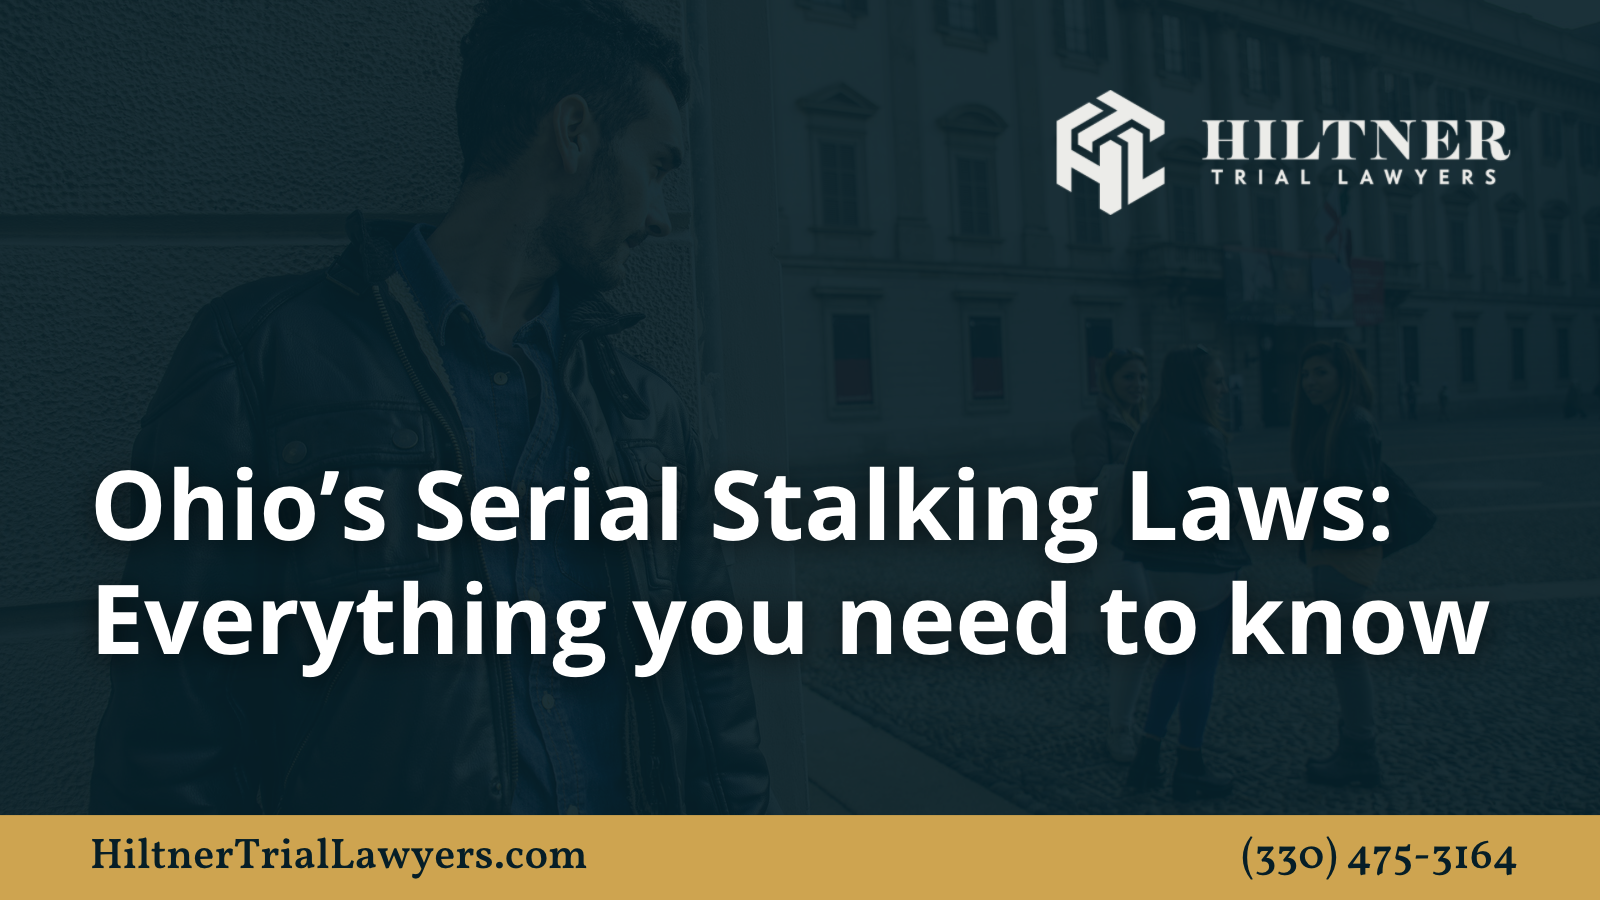 Ohio’s Serial Stalking Laws - Hiltner Trial Lawyers Ohio - max hiltner